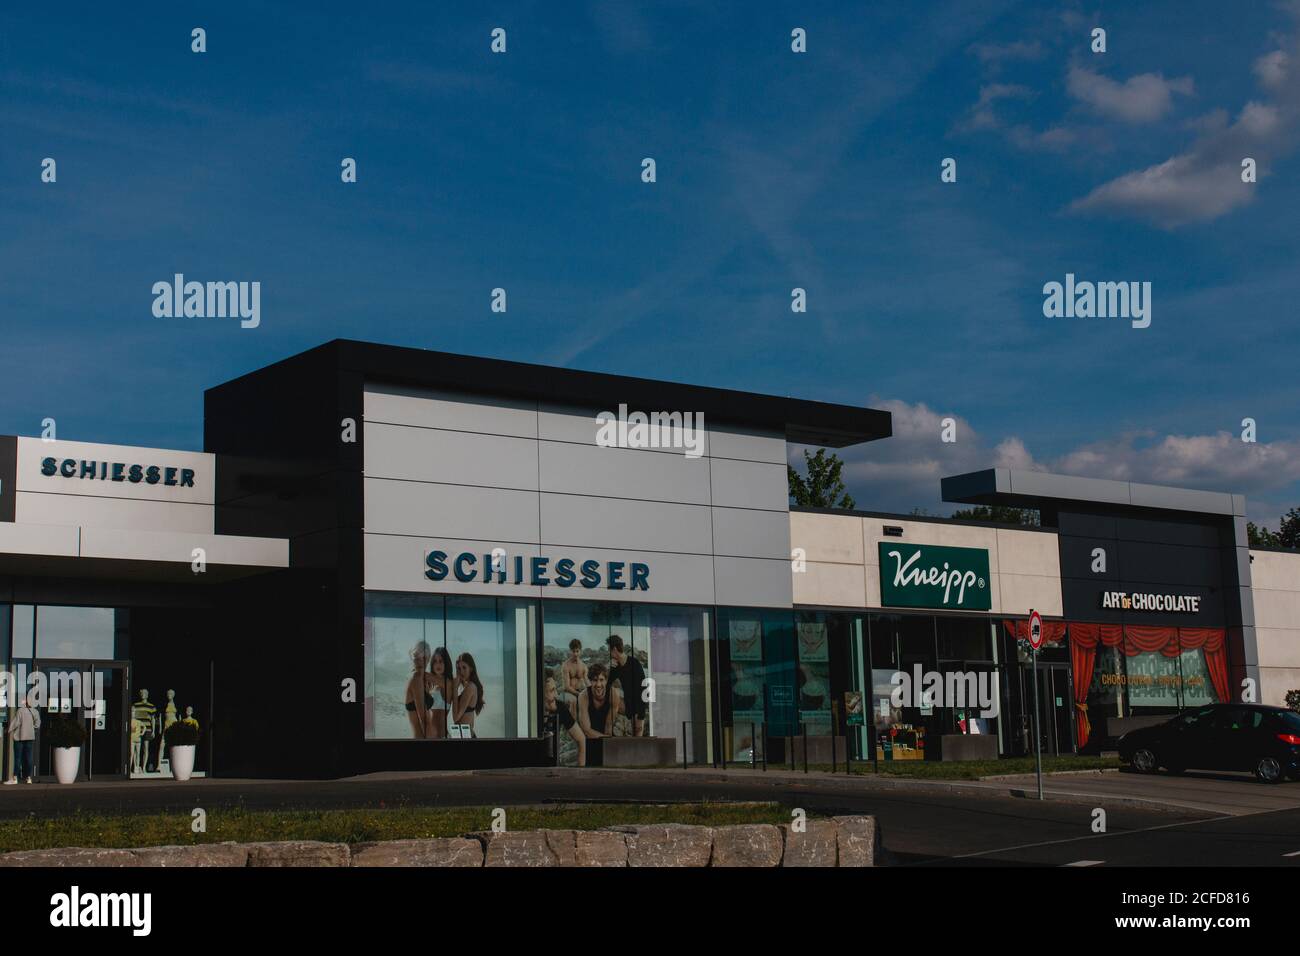 Outlet center in Rottendorf near Würzburg during the times of Corona  Schiesser and Kneipp Stock Photo - Alamy